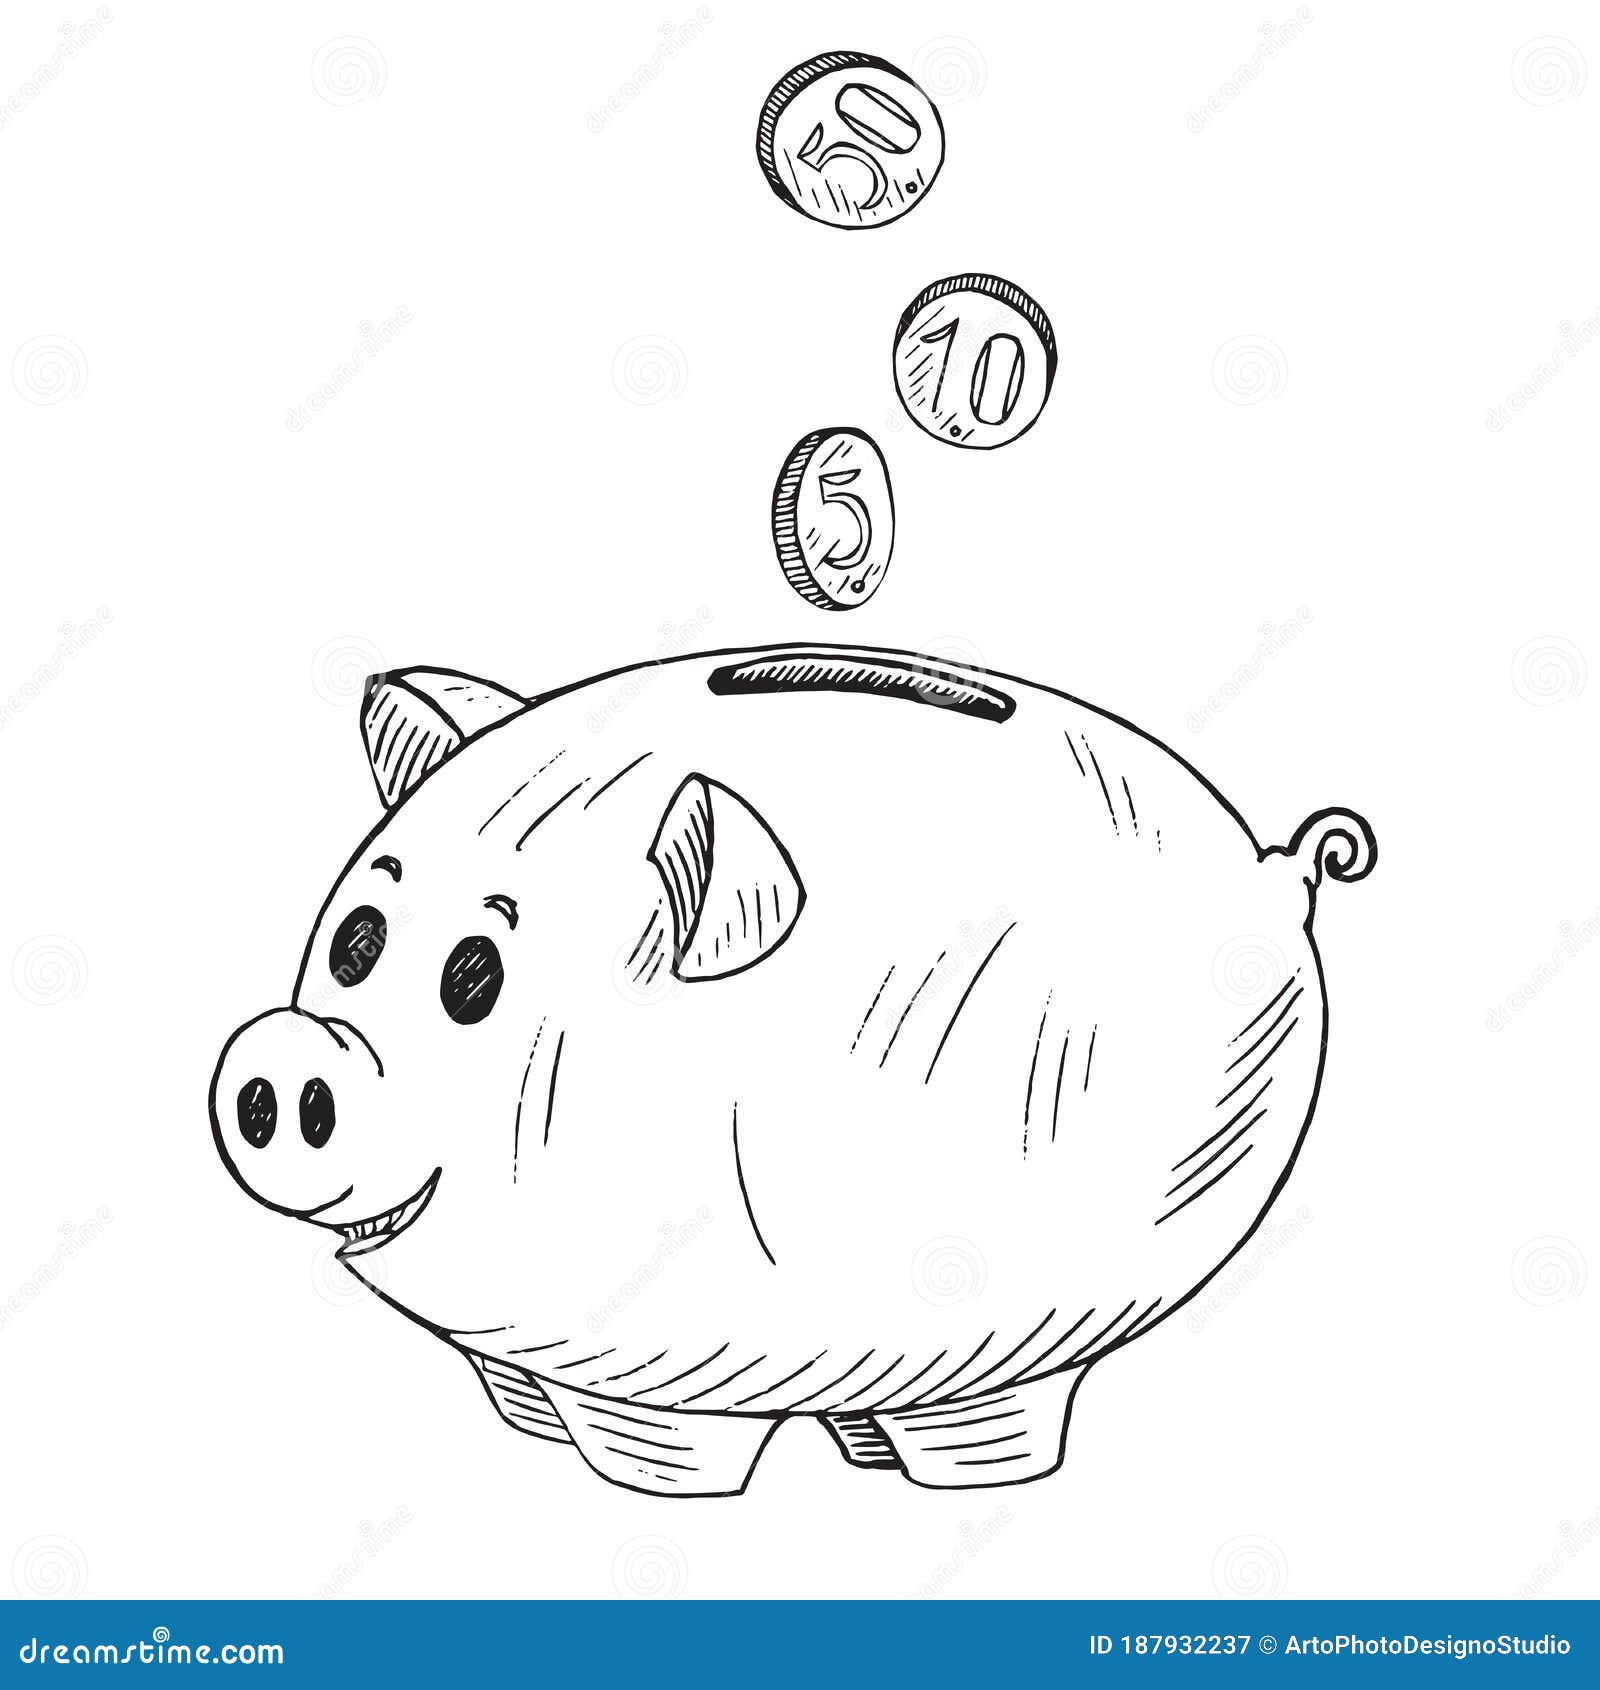 Cute Pink Piggy Bank With Dotted Design Drawing Of Isolated Money Container  In Shape Of Nice Pig Stock Illustration  Download Image Now  iStock